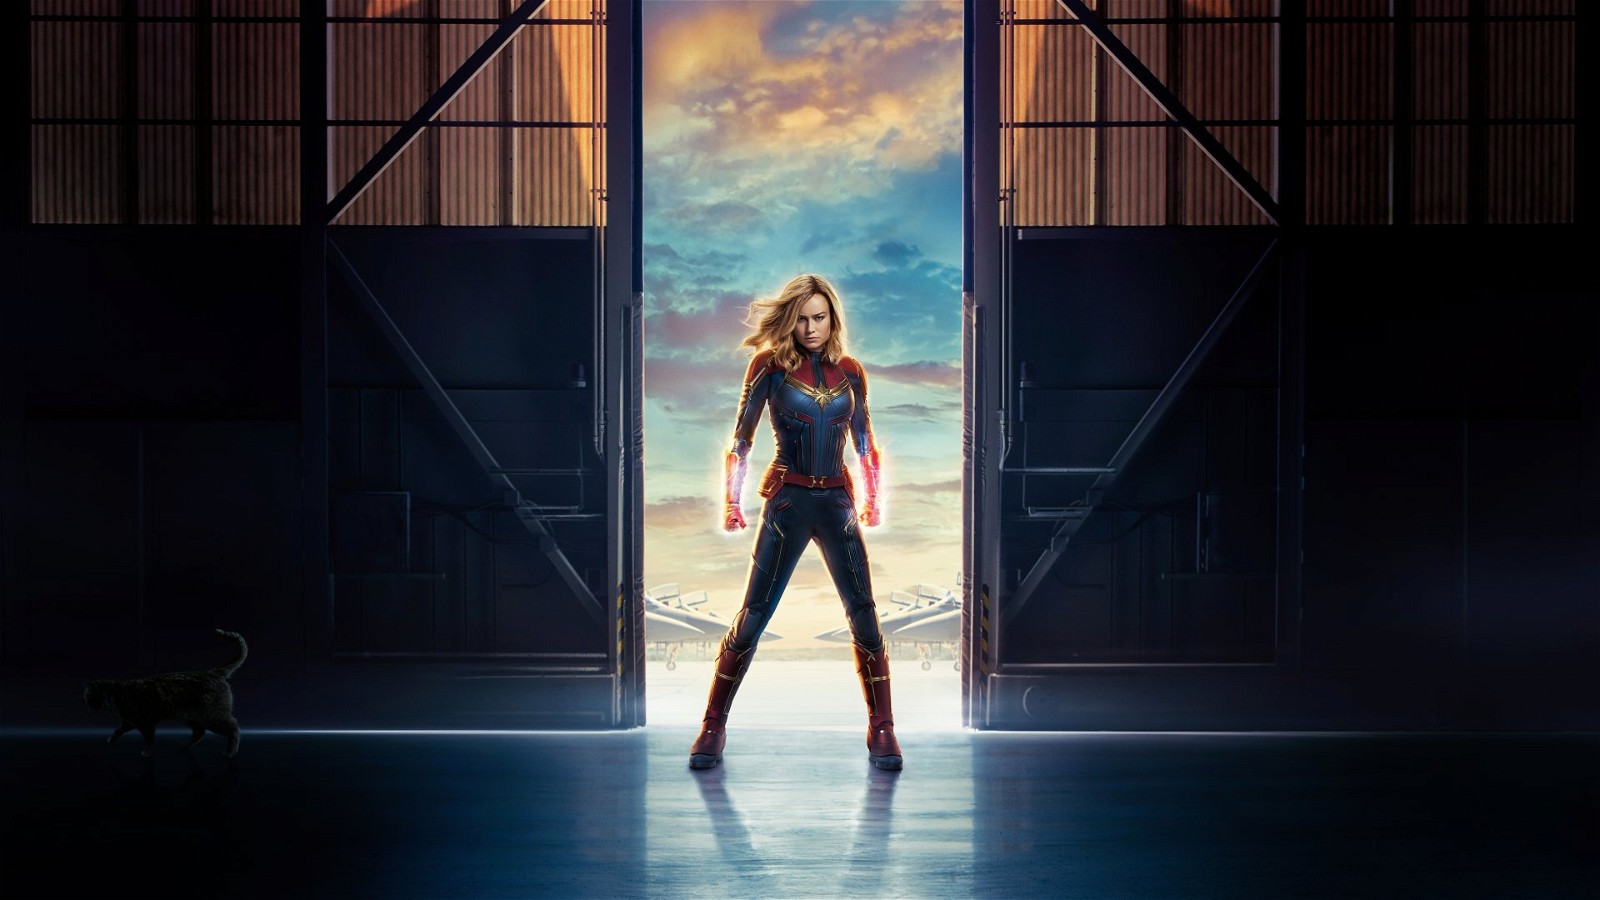 Brie Larson as Captain Marvel in the MCU.